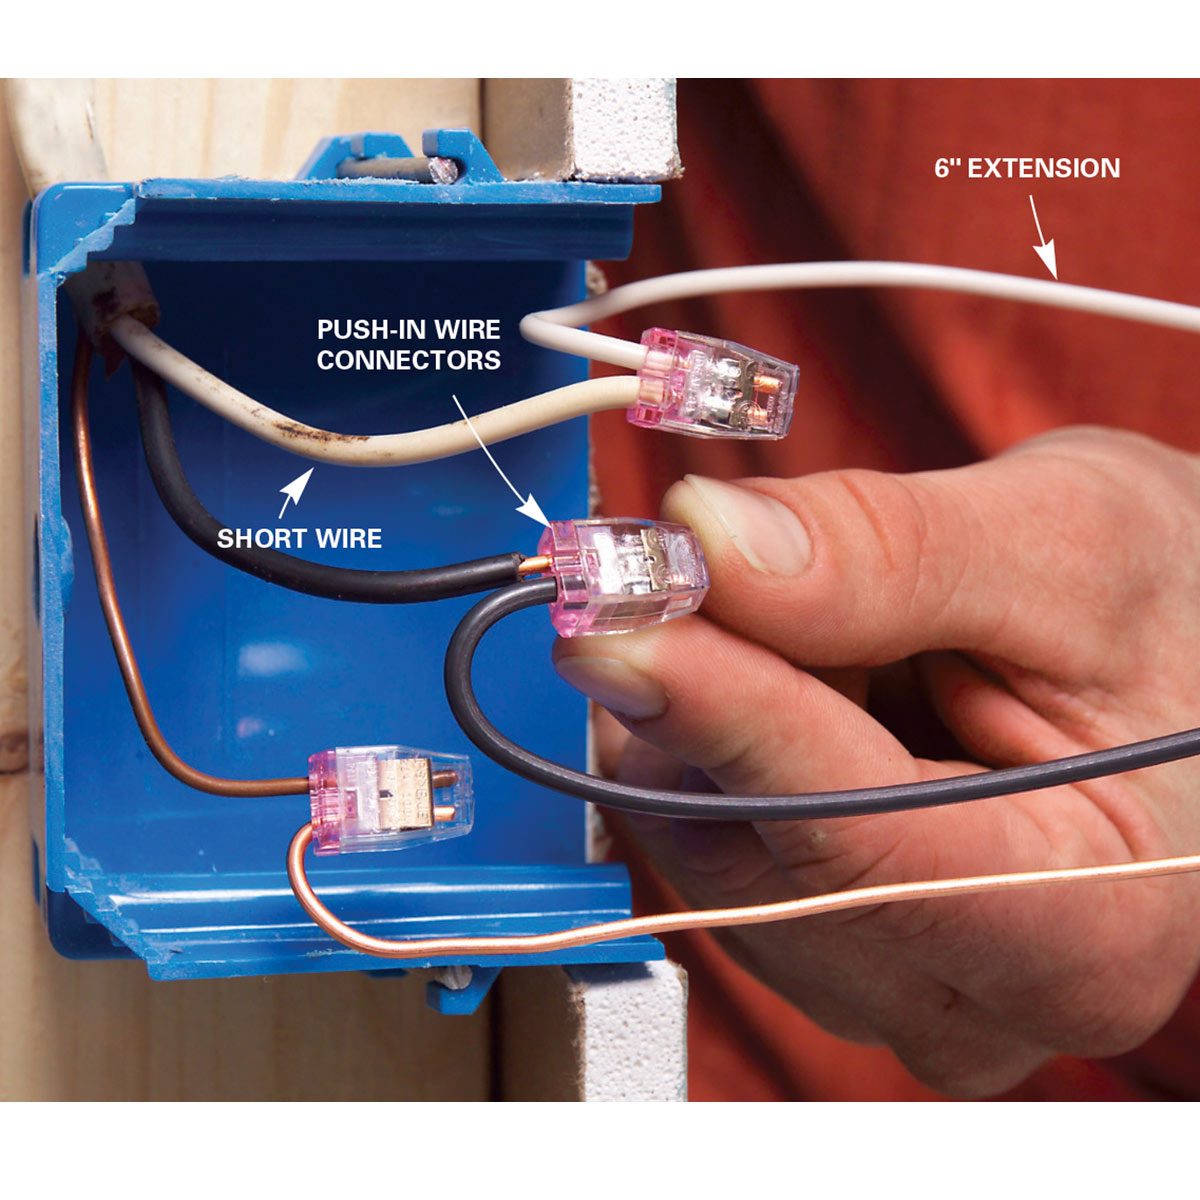 Wiring a Switch and Outlet the Safe and Easy Way